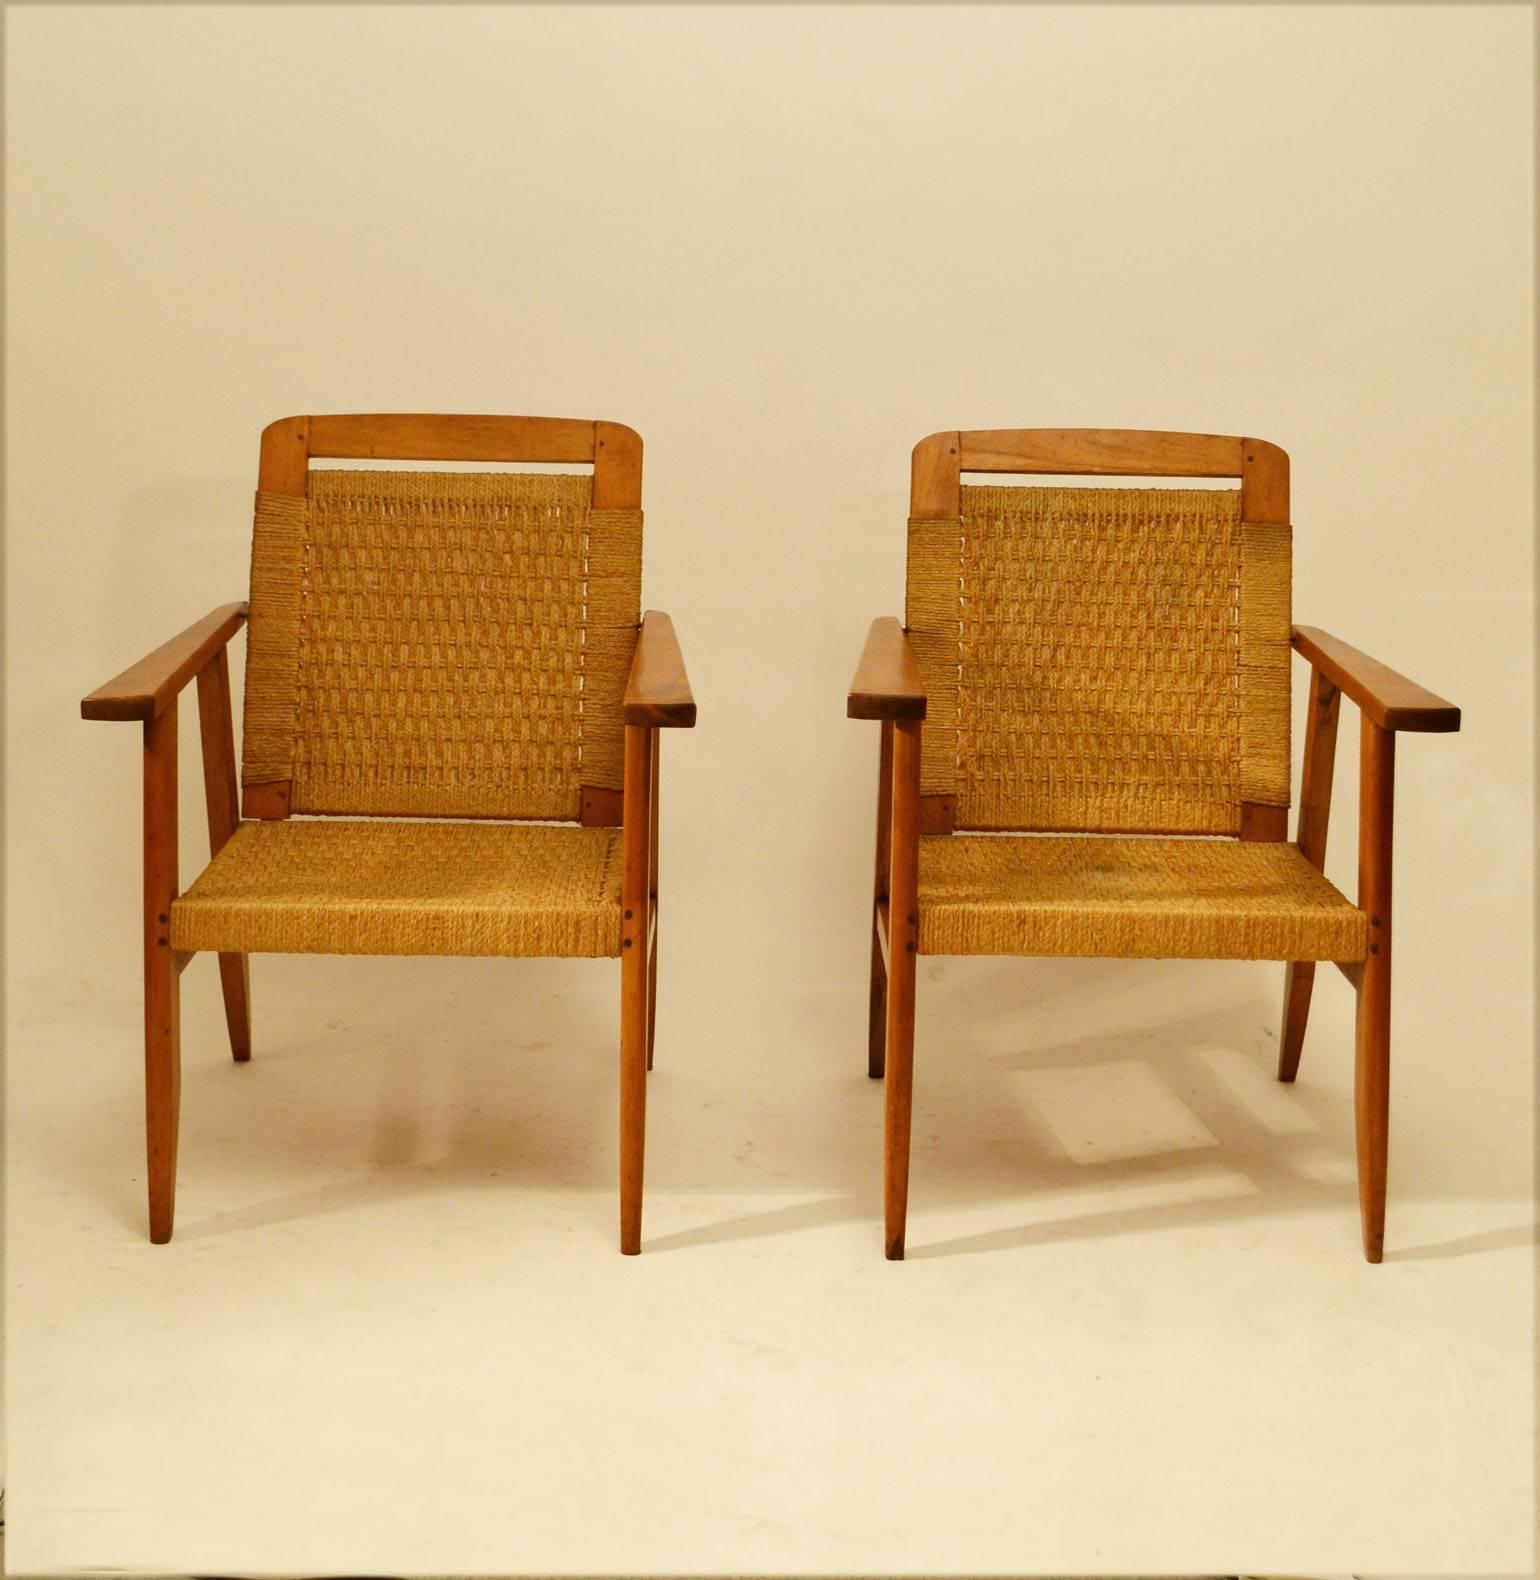 Modernist design of oak frame chairs with woven rush seat and adjustable swivel back.